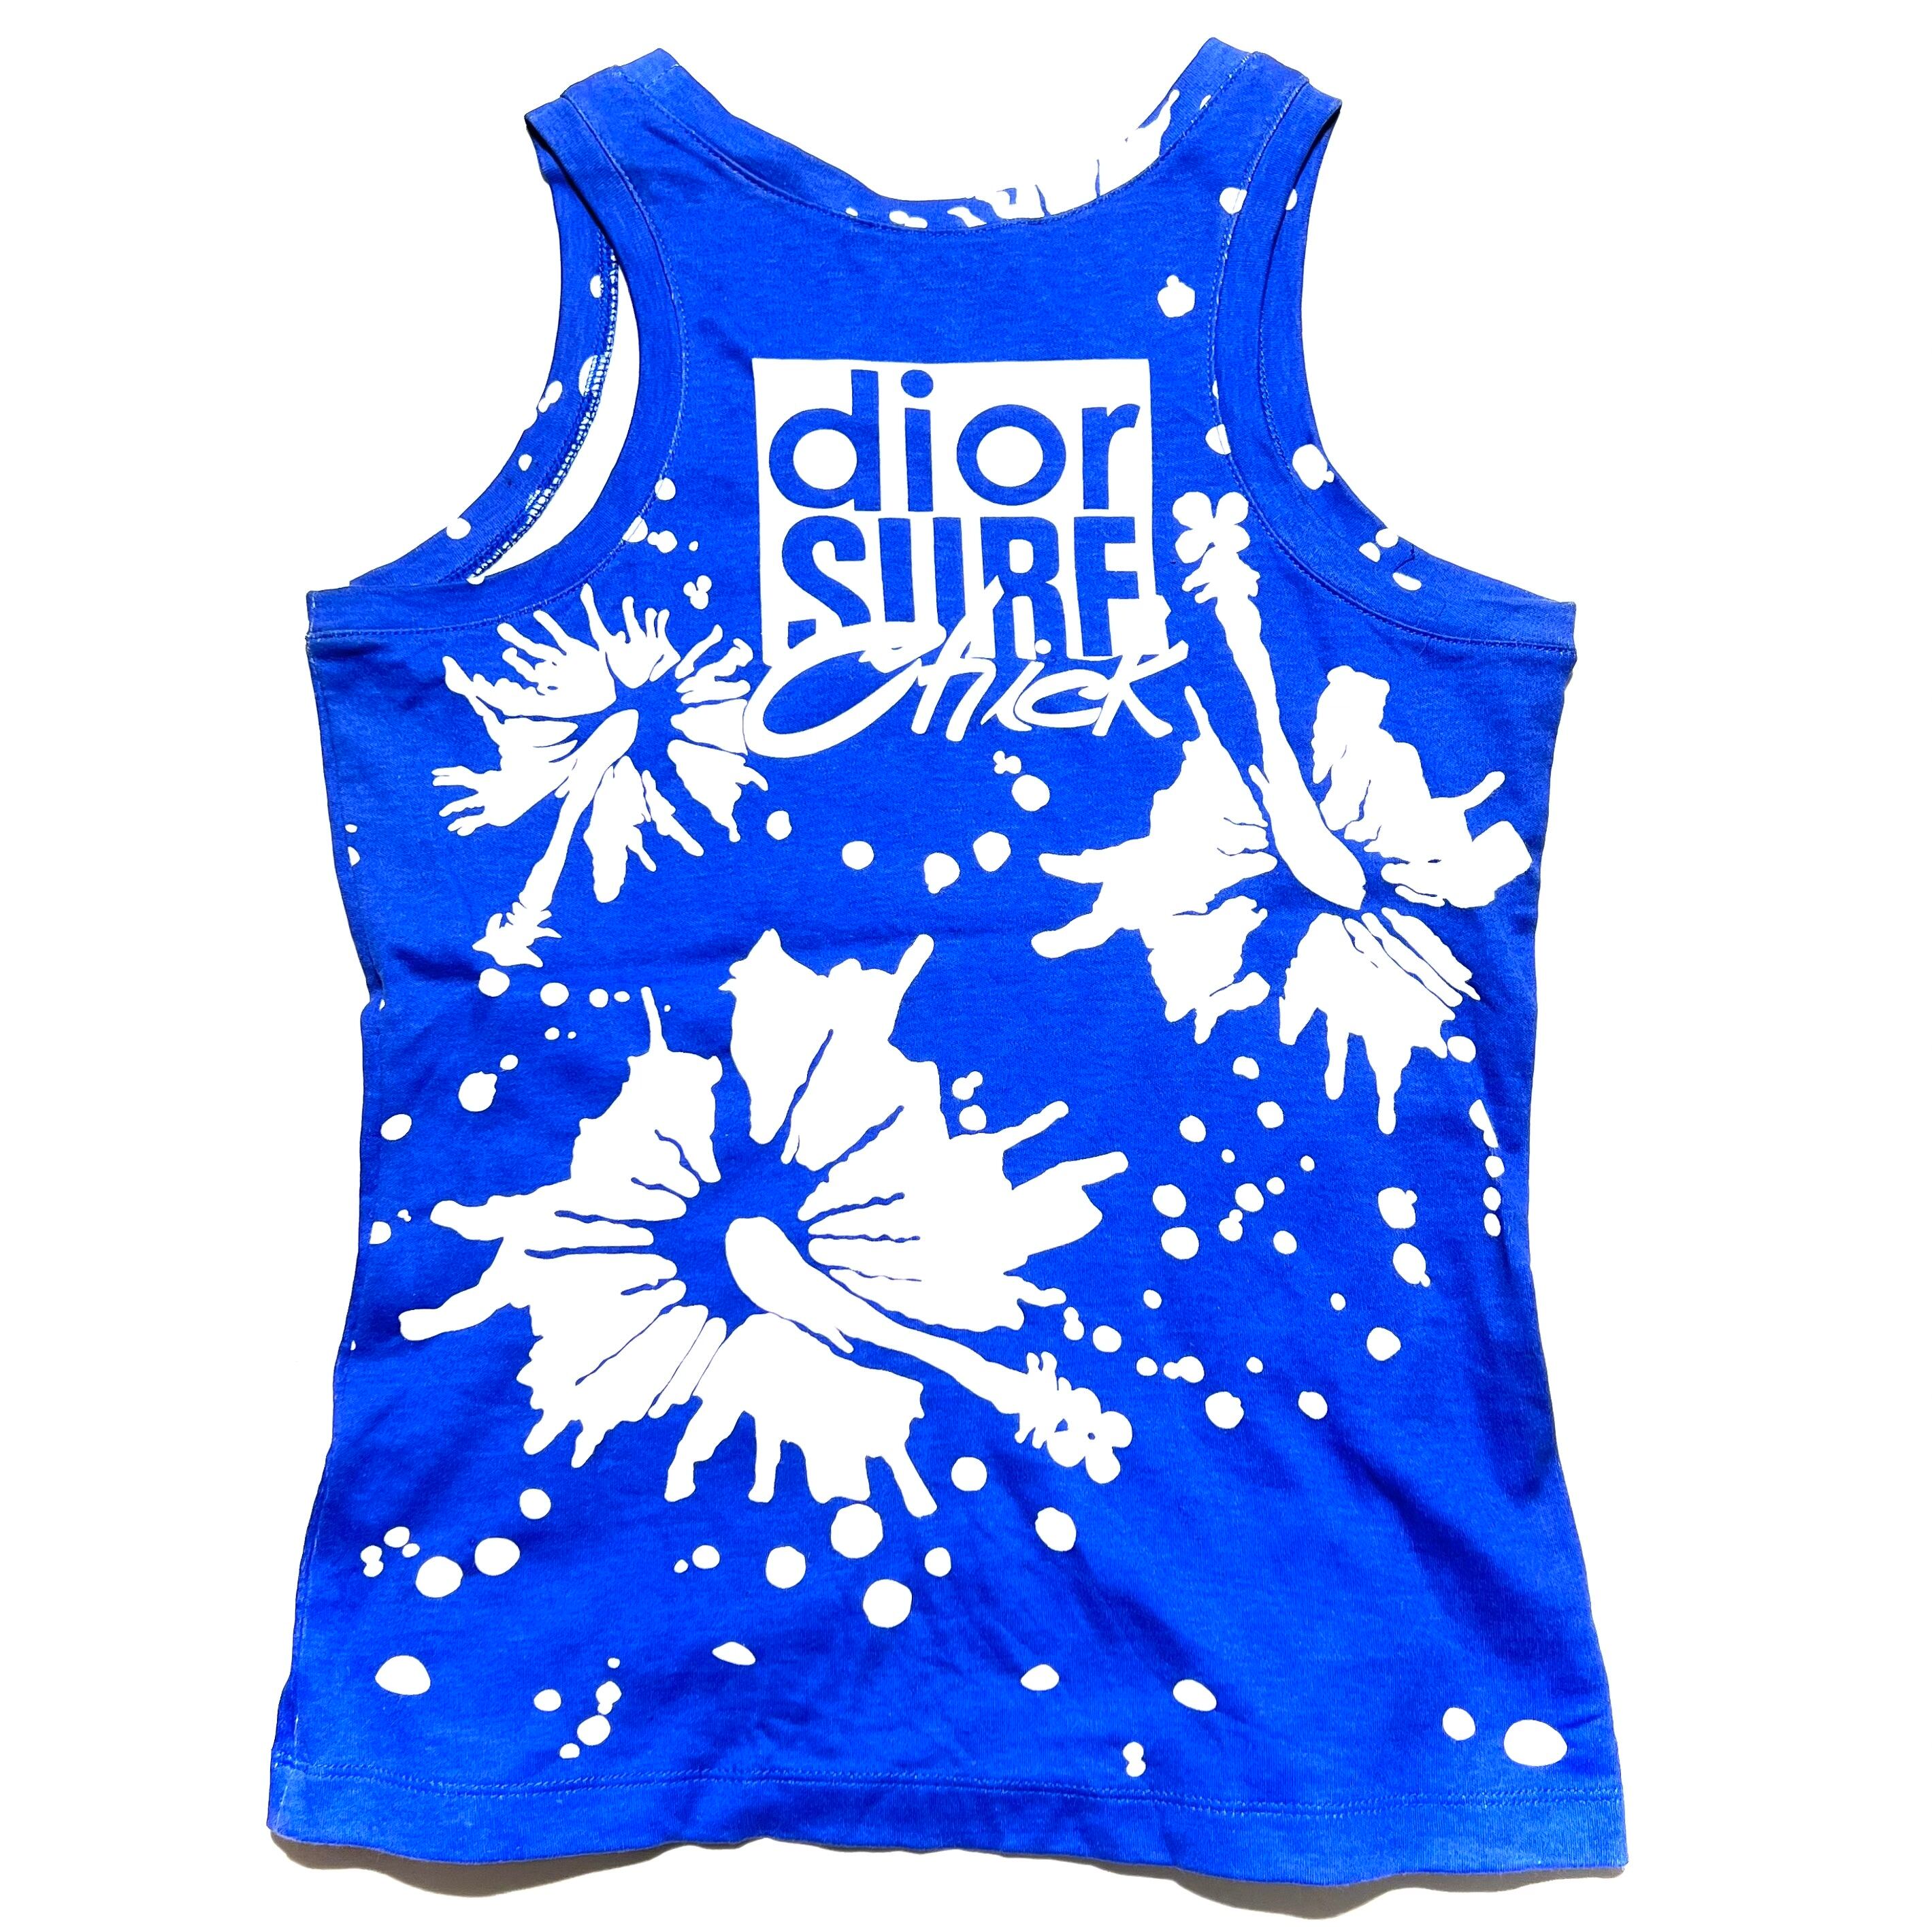 “SURF CHICK” Christian Dior ss04 surf collection tank | DENSE powered by  BASE